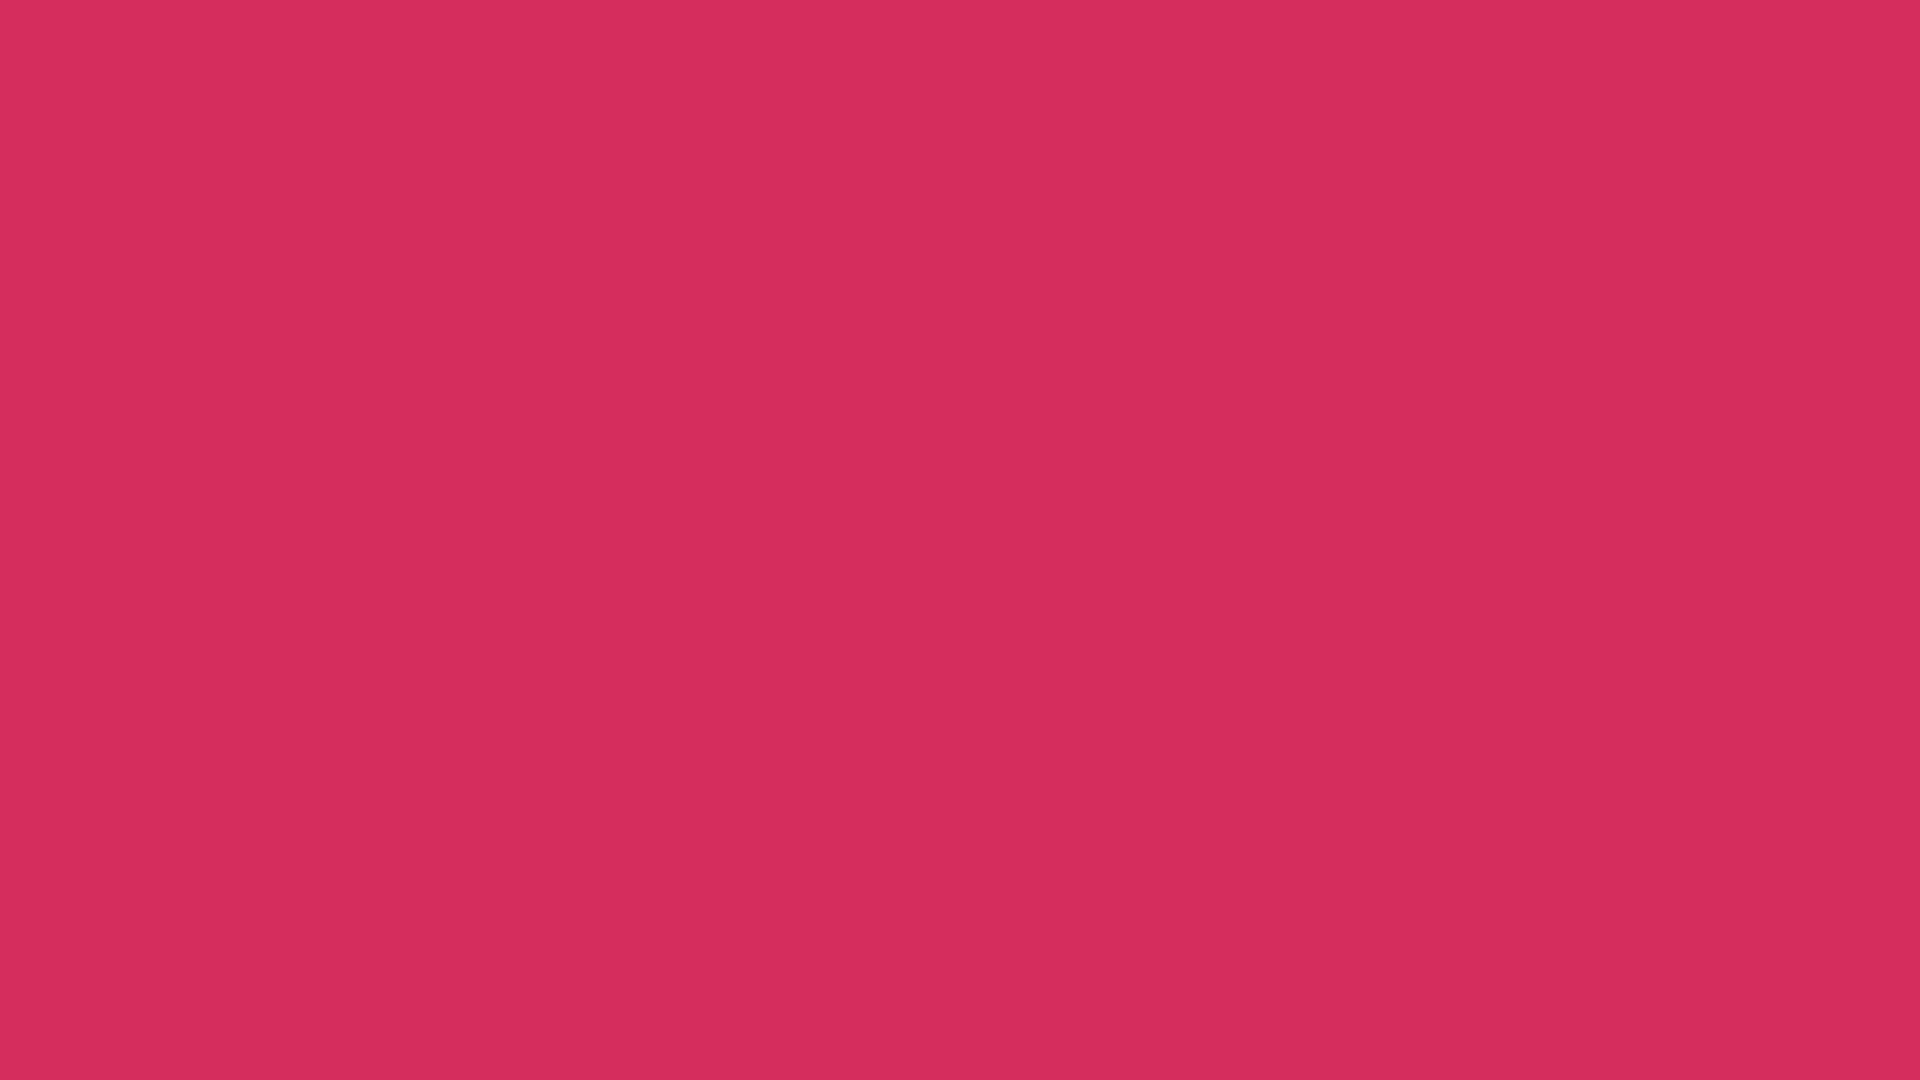 The Pantone Color Institute has named Viva Magenta as its color of the year for 2023, saying it is ...